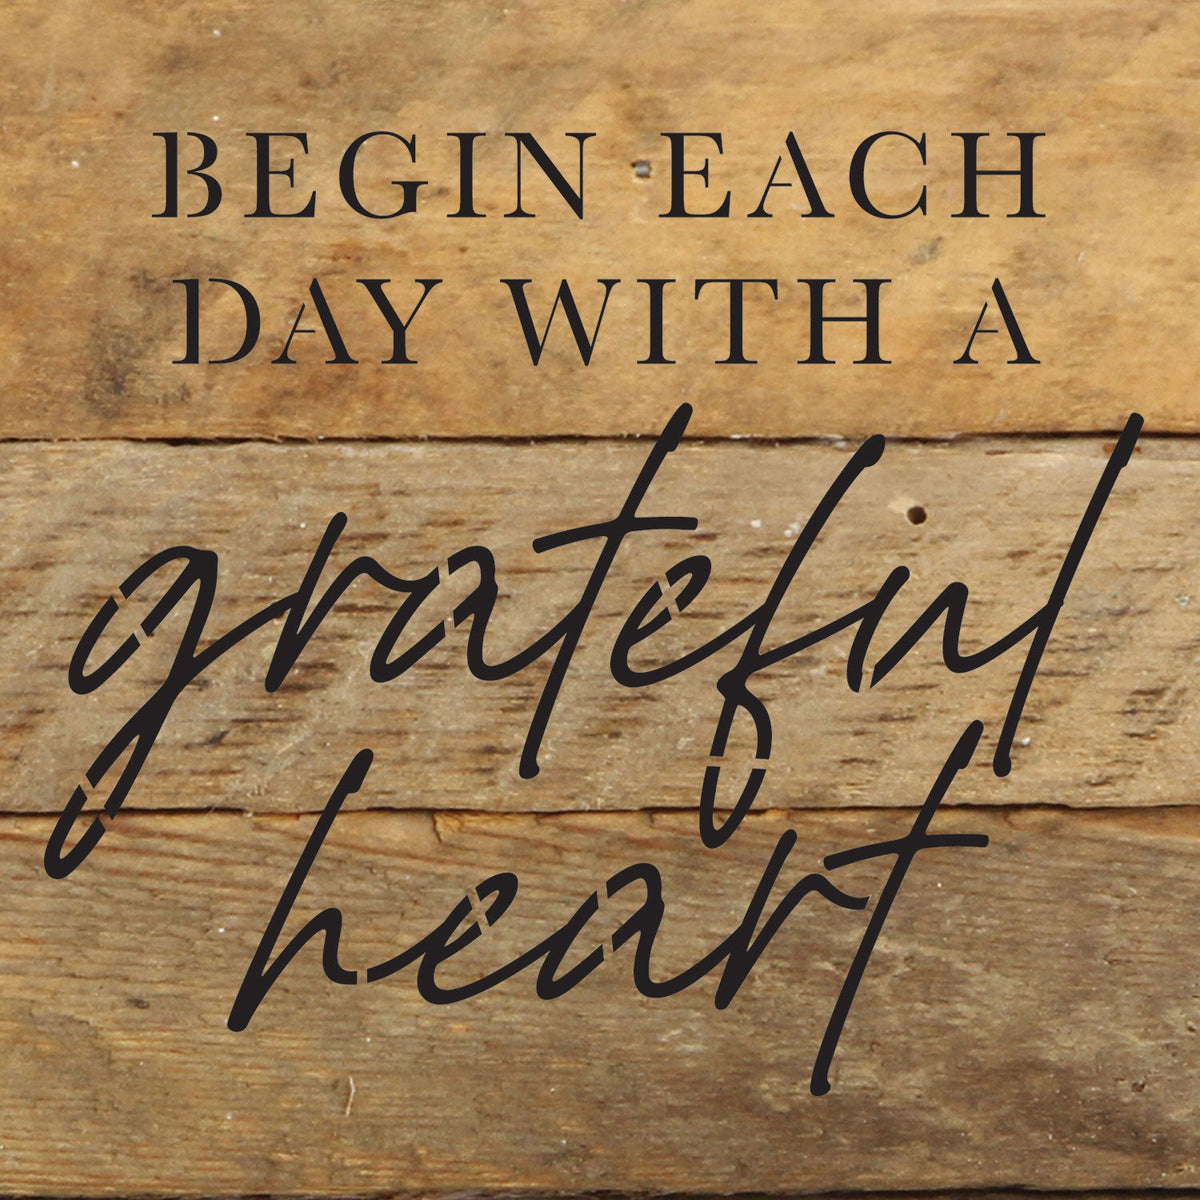 Begin each day with a grateful heart / 6x6 Reclaimed Wood Wall Decor Sign